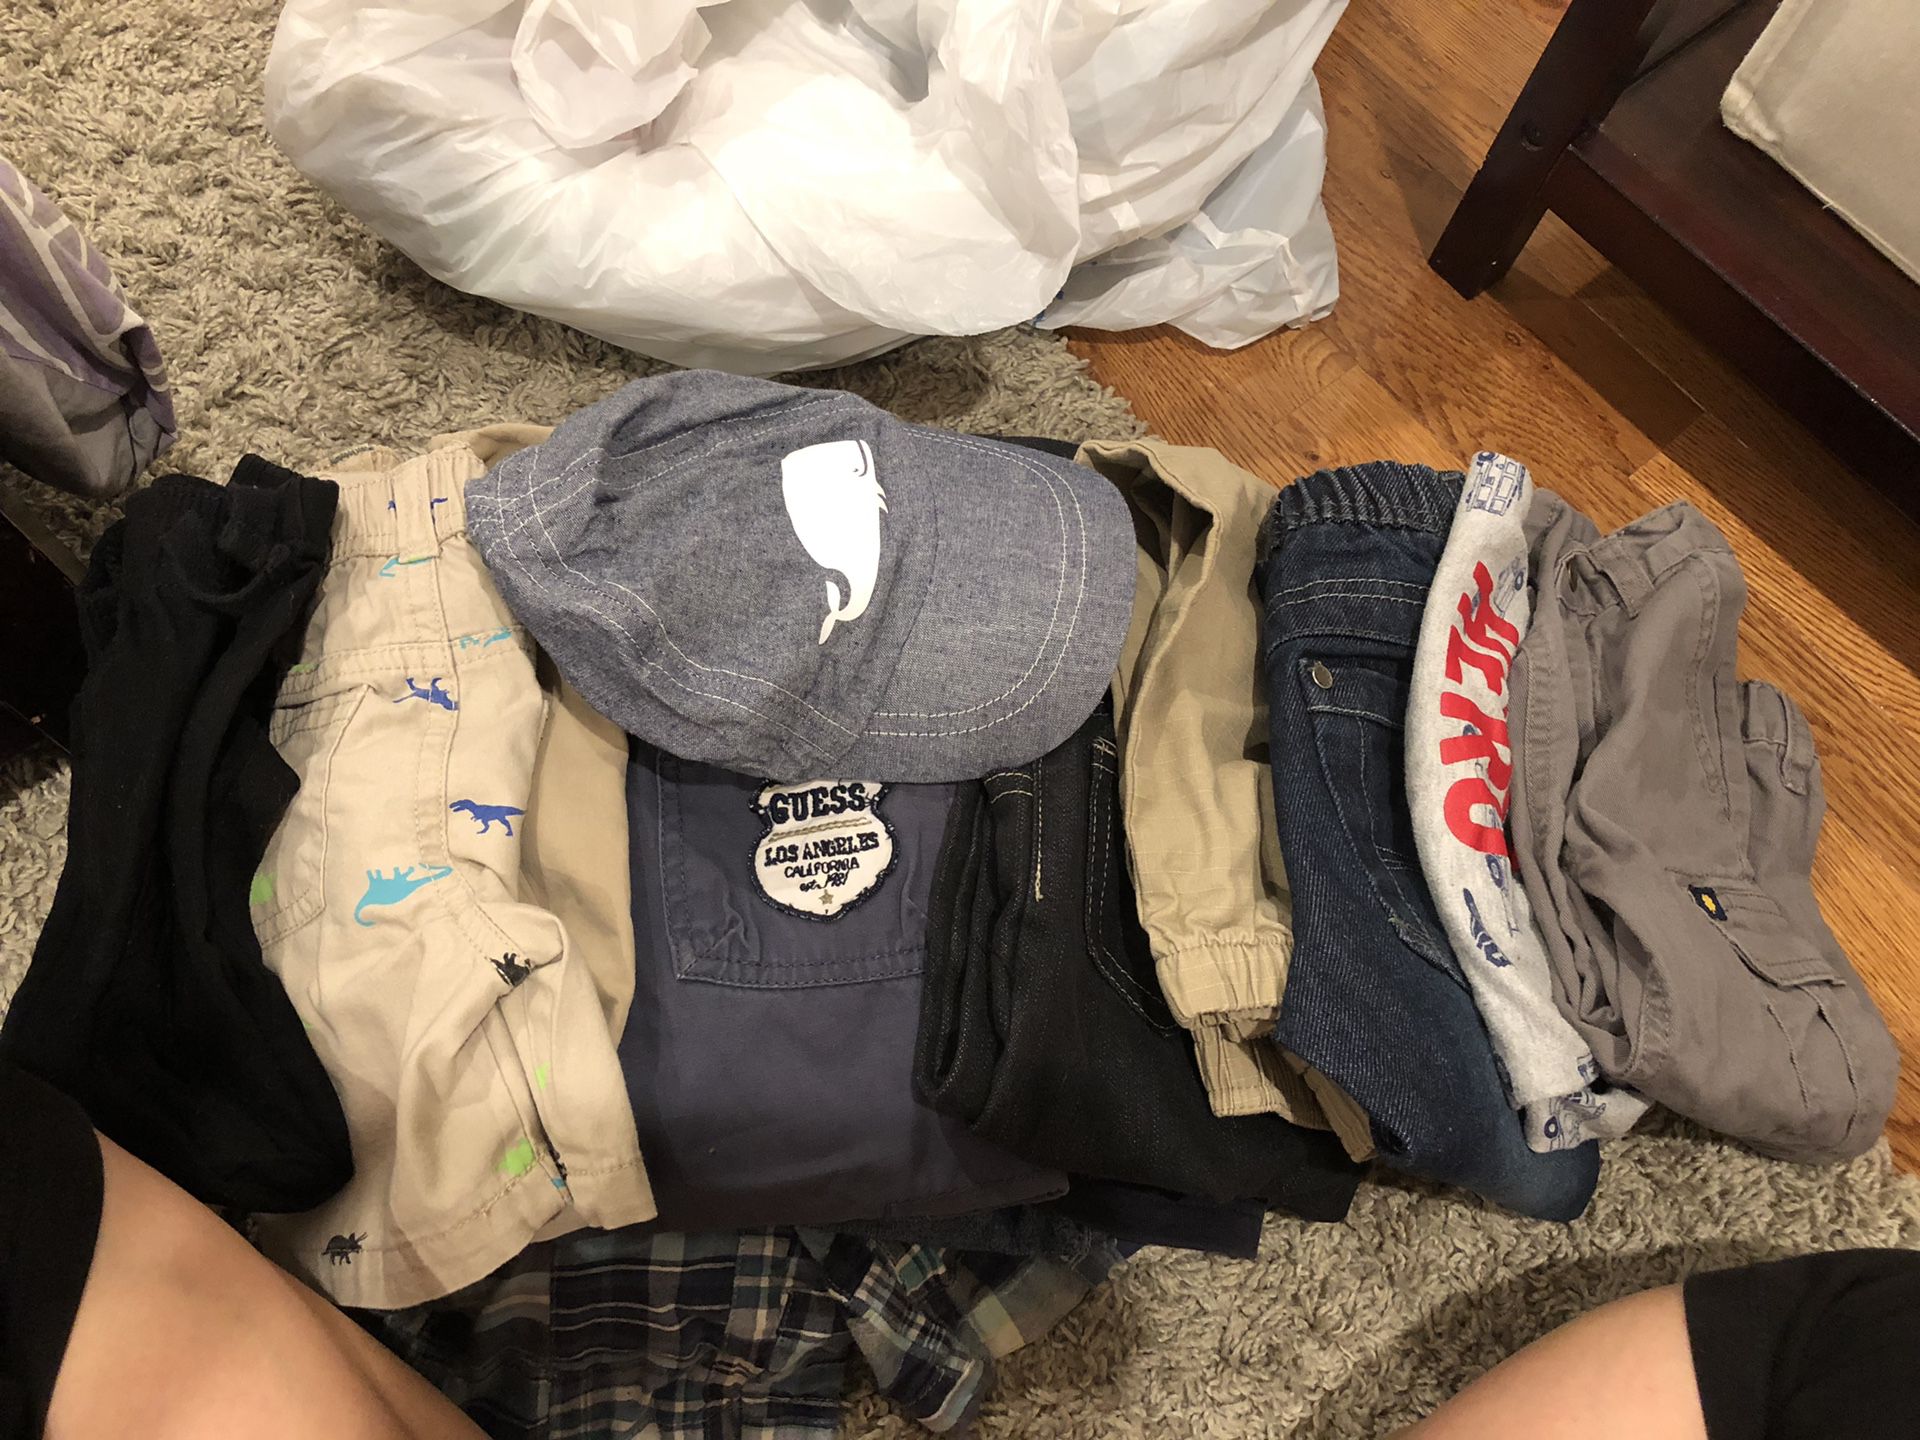 Toddlers clothes